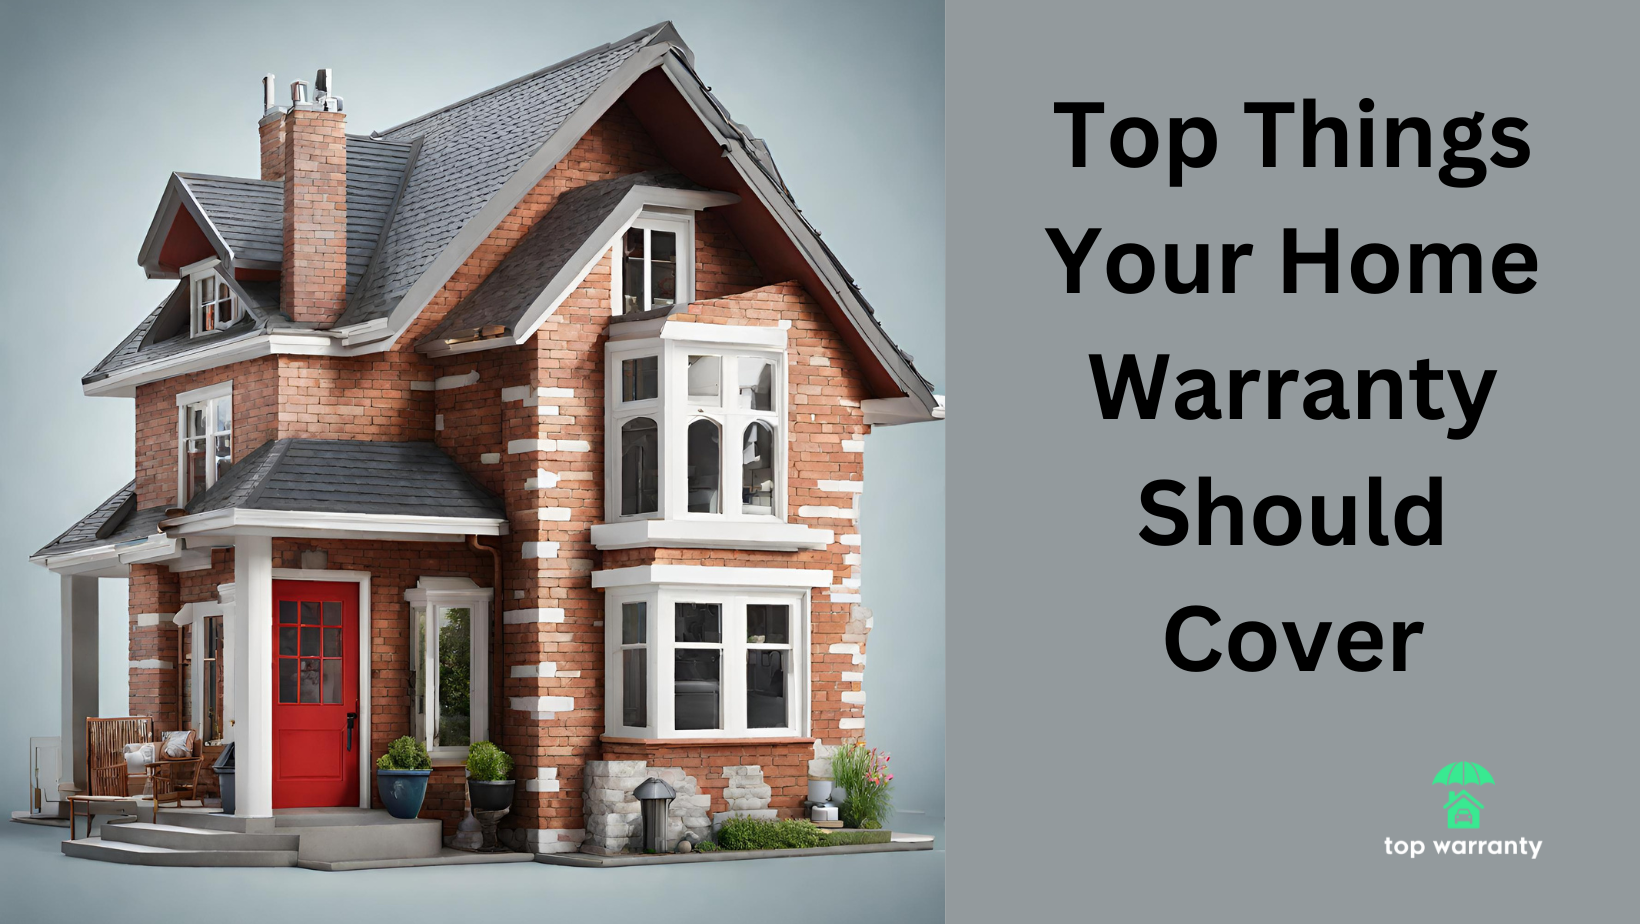 Top Things Your Home Warranty Should Cover